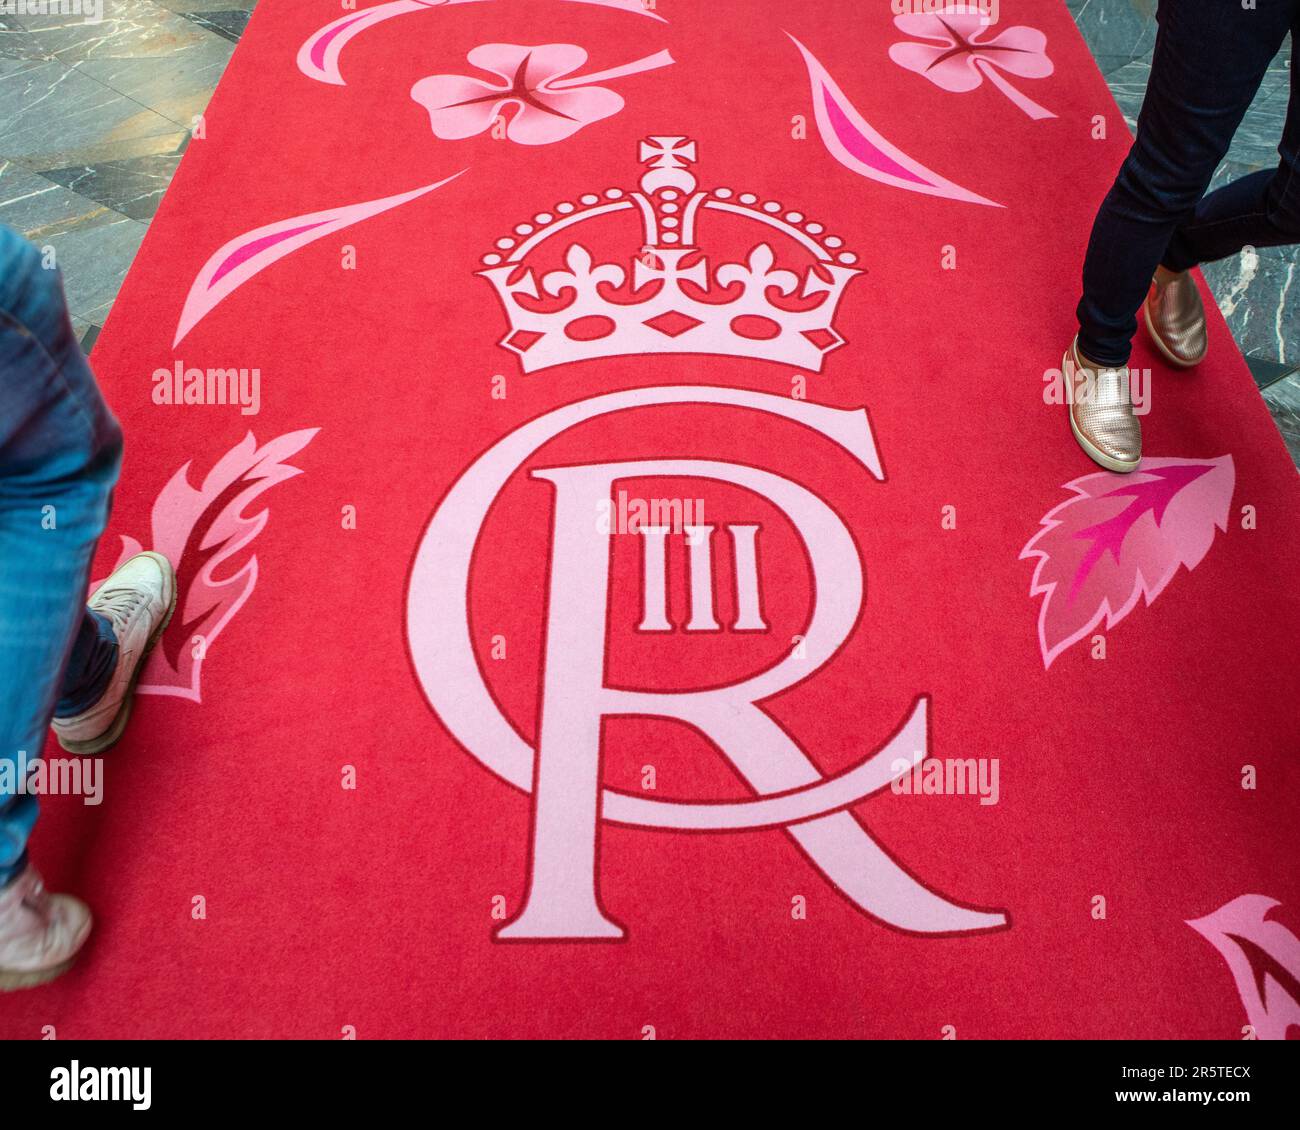 London, UK - April 30th 2023: The cypher of King Charles III, on a red carpet in Burlington Arcade in London, UK. The logo is on display to commemorat Stock Photo